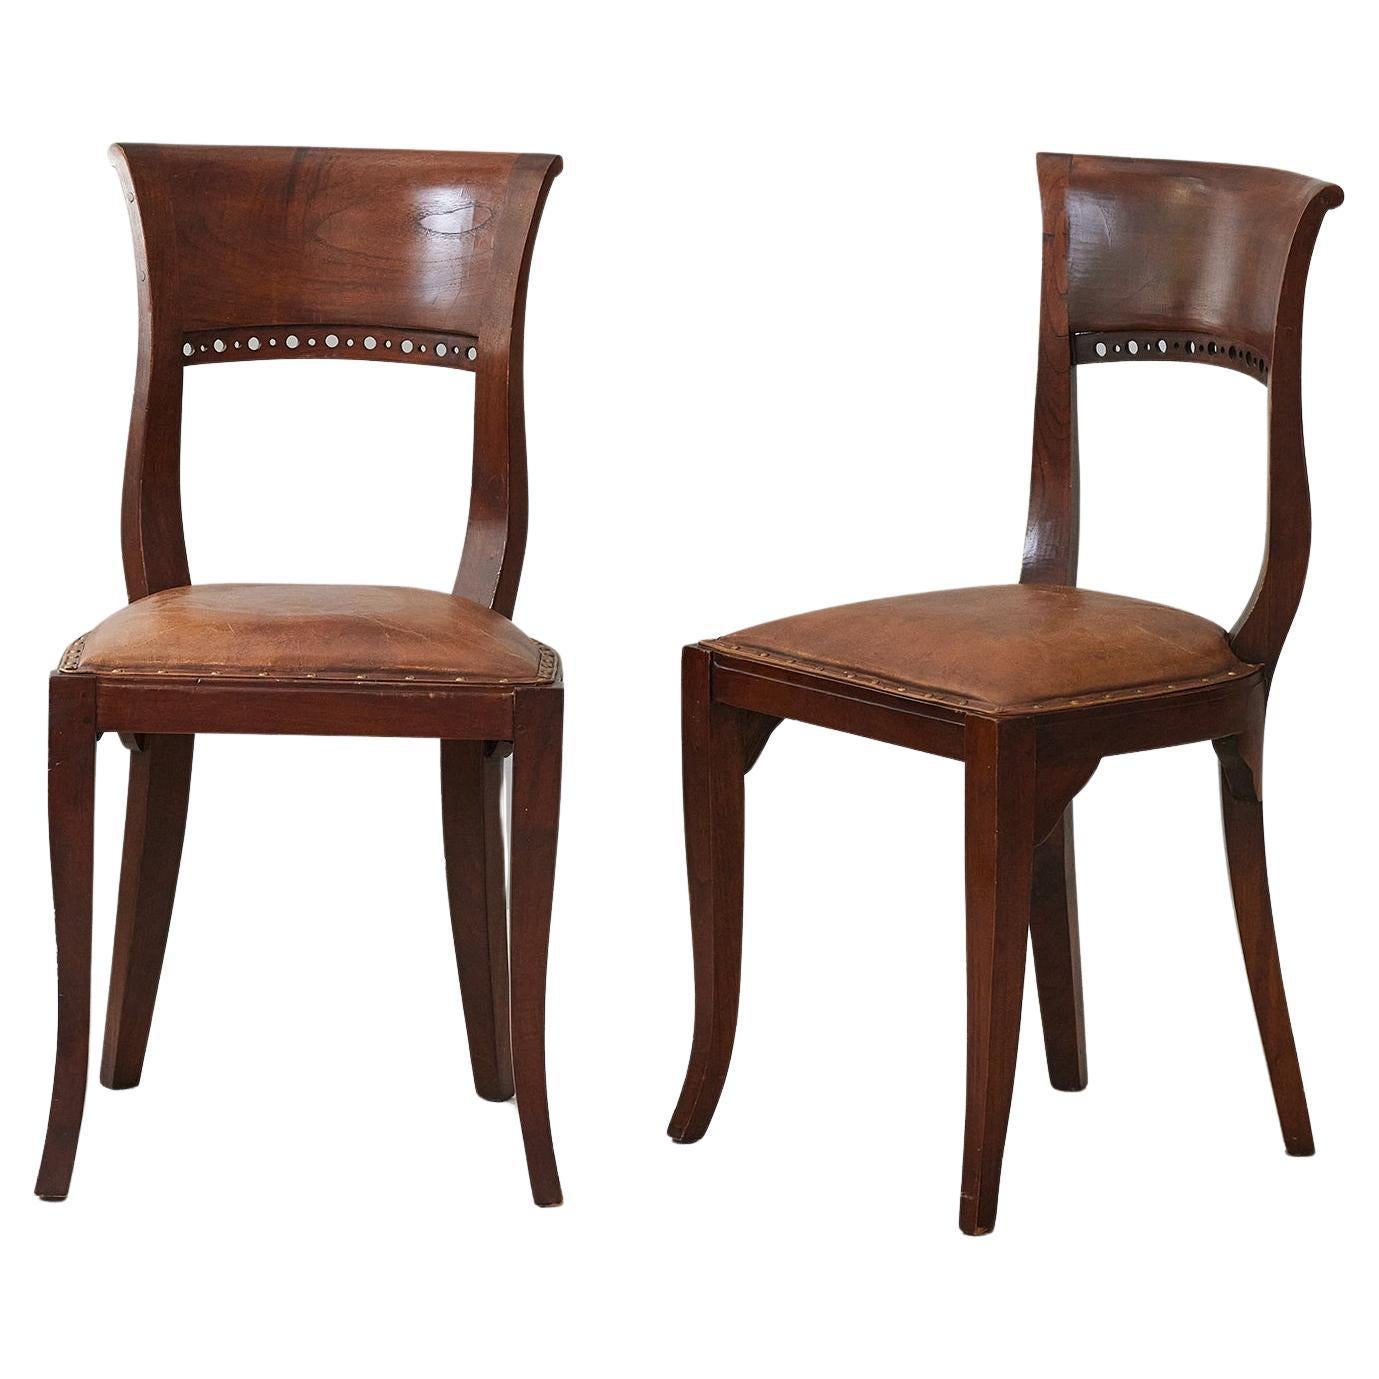 Sculptural Pair of Art Nouveau Dining Chairs For Sale